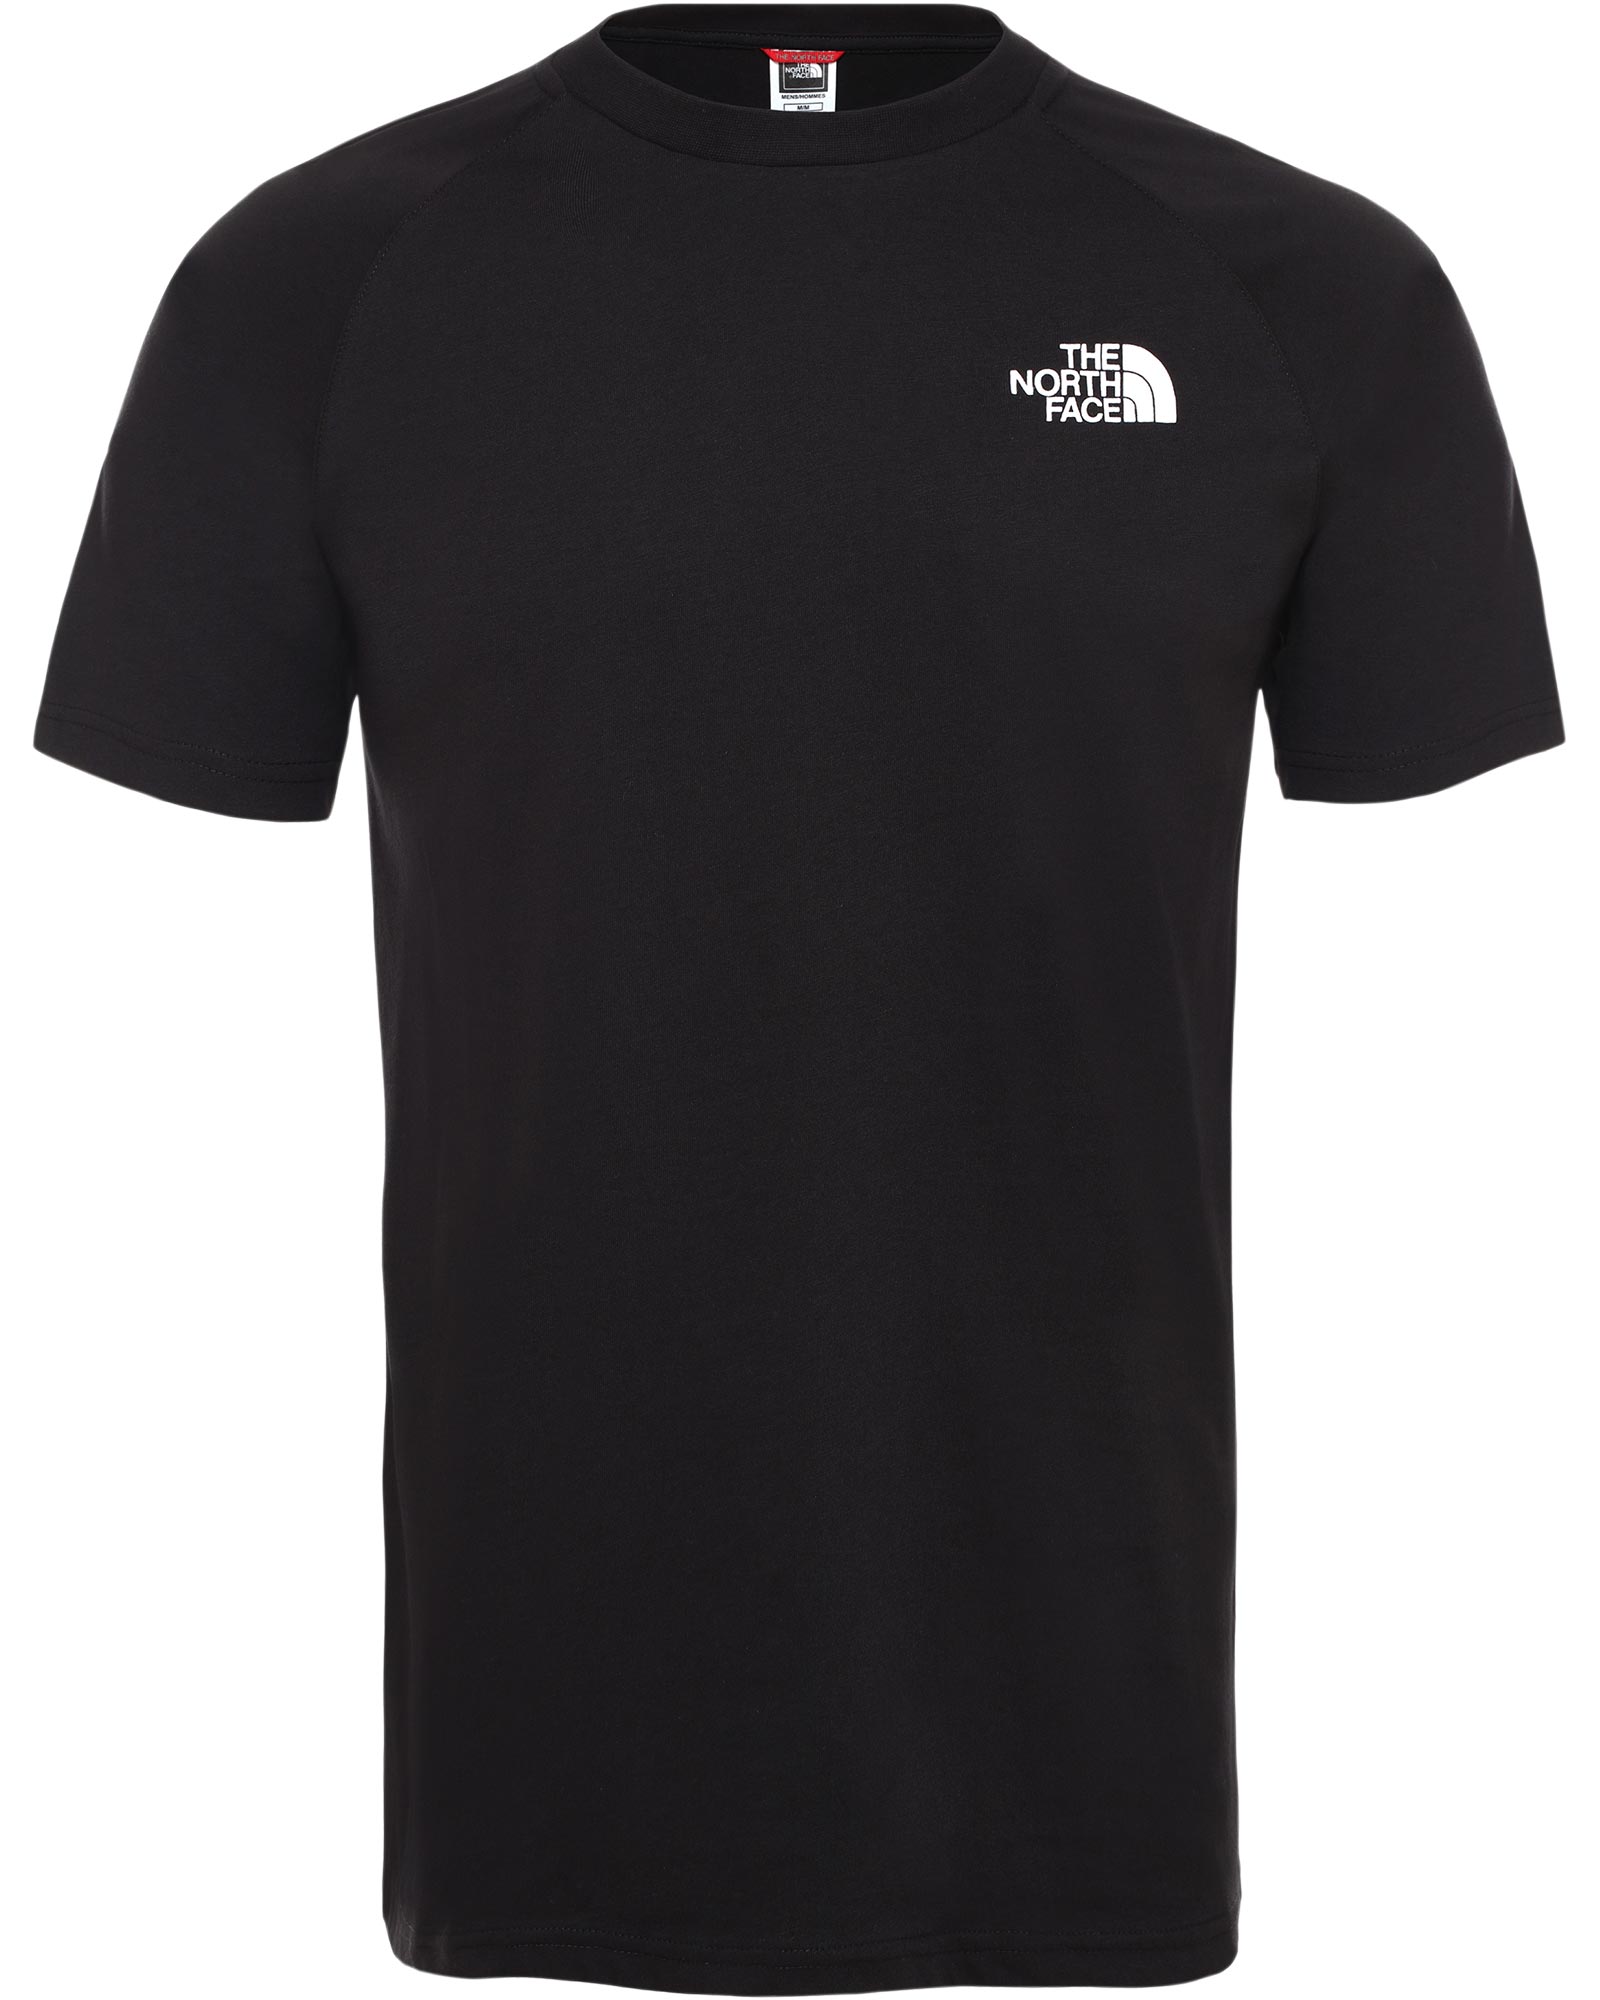 The North Face North Faces Men’s T Shirt - TNF Black S